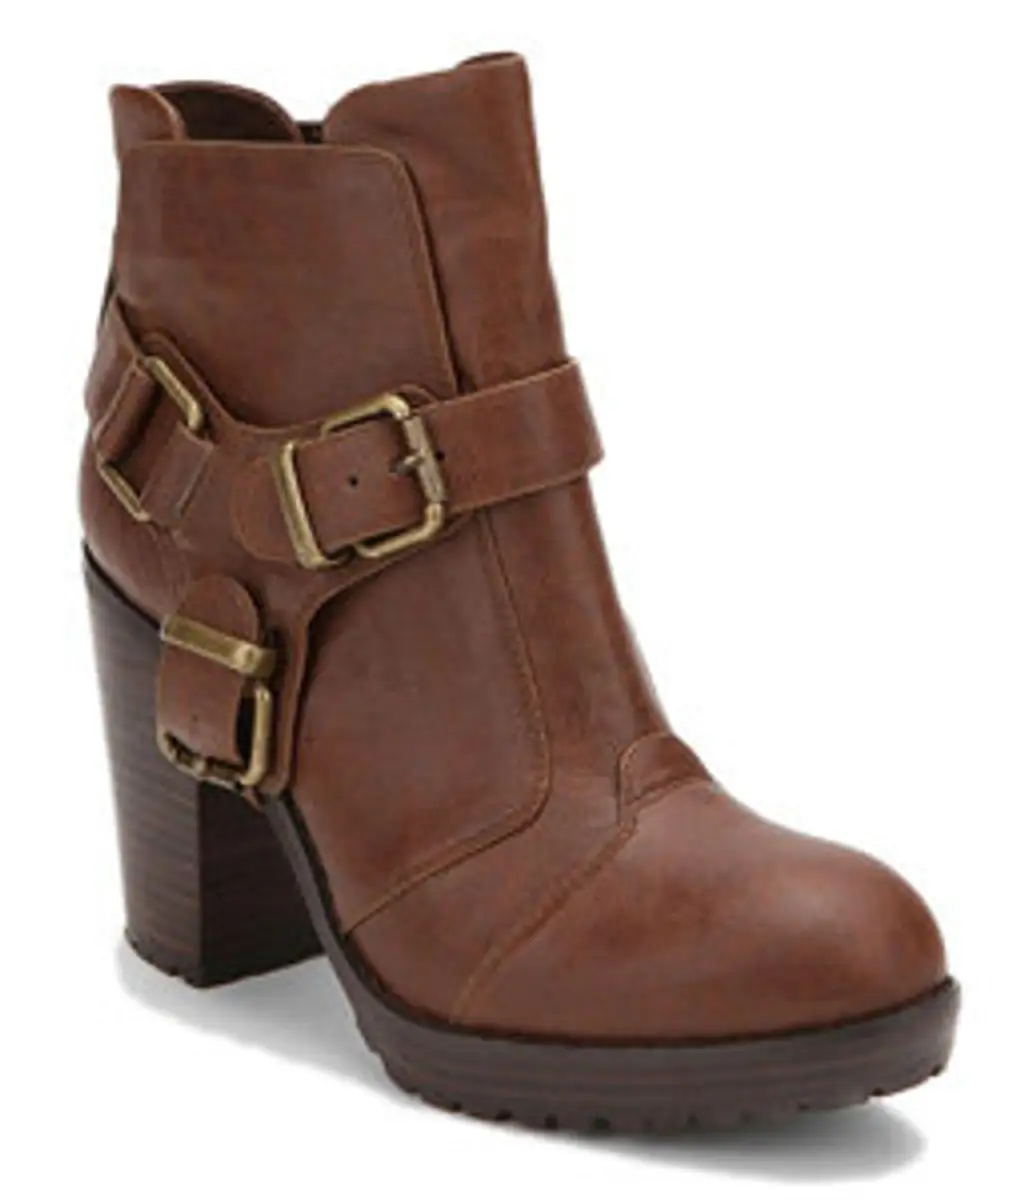 Dolcetta by Dolce Vita Harness Heel Boots